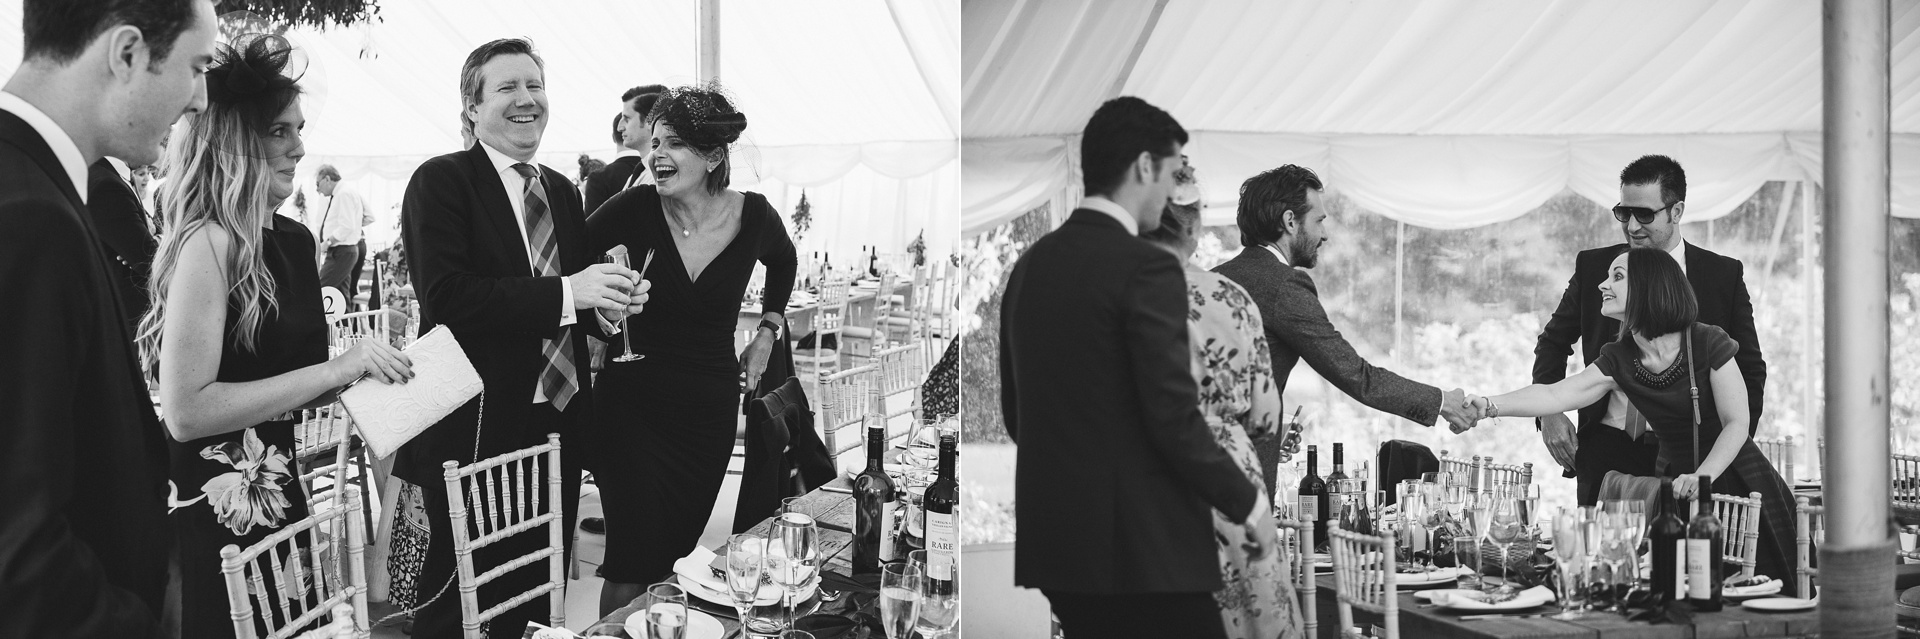 Guests laughing inside a marquee